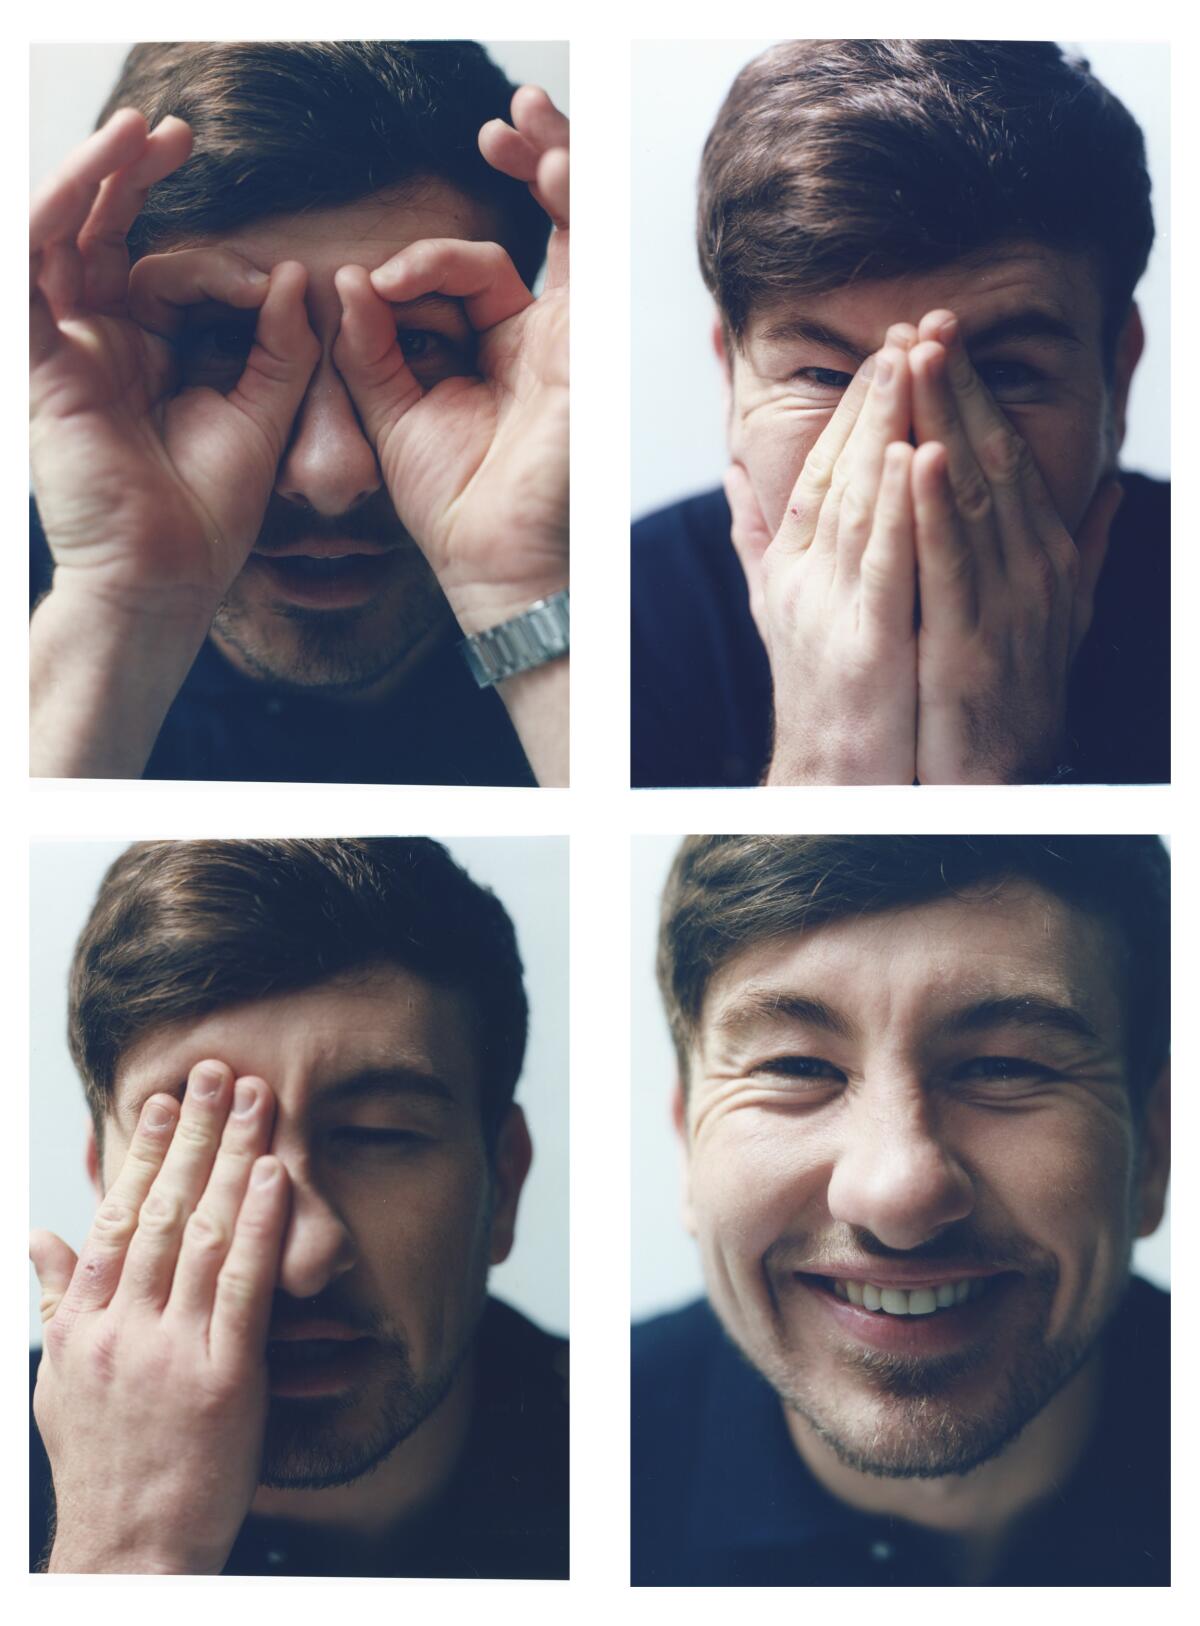 In four photo panels, Barry Keoghan covers parts of his face with his hands, until the final one in which he smiles.